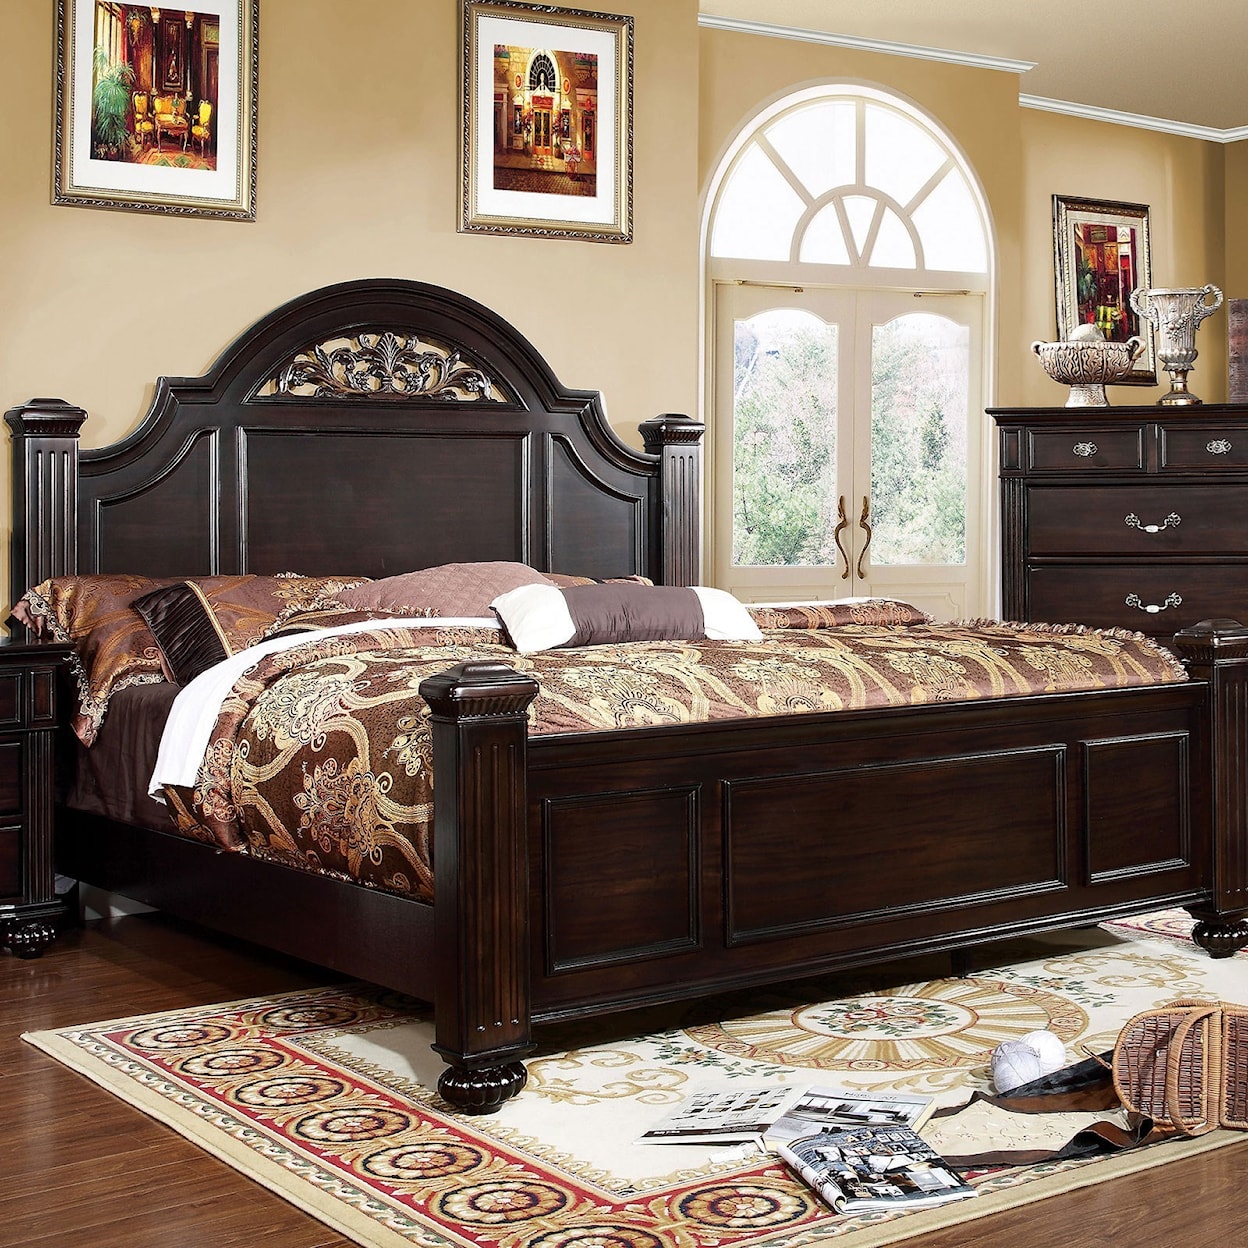 Furniture of America Syracuse Queen Bed